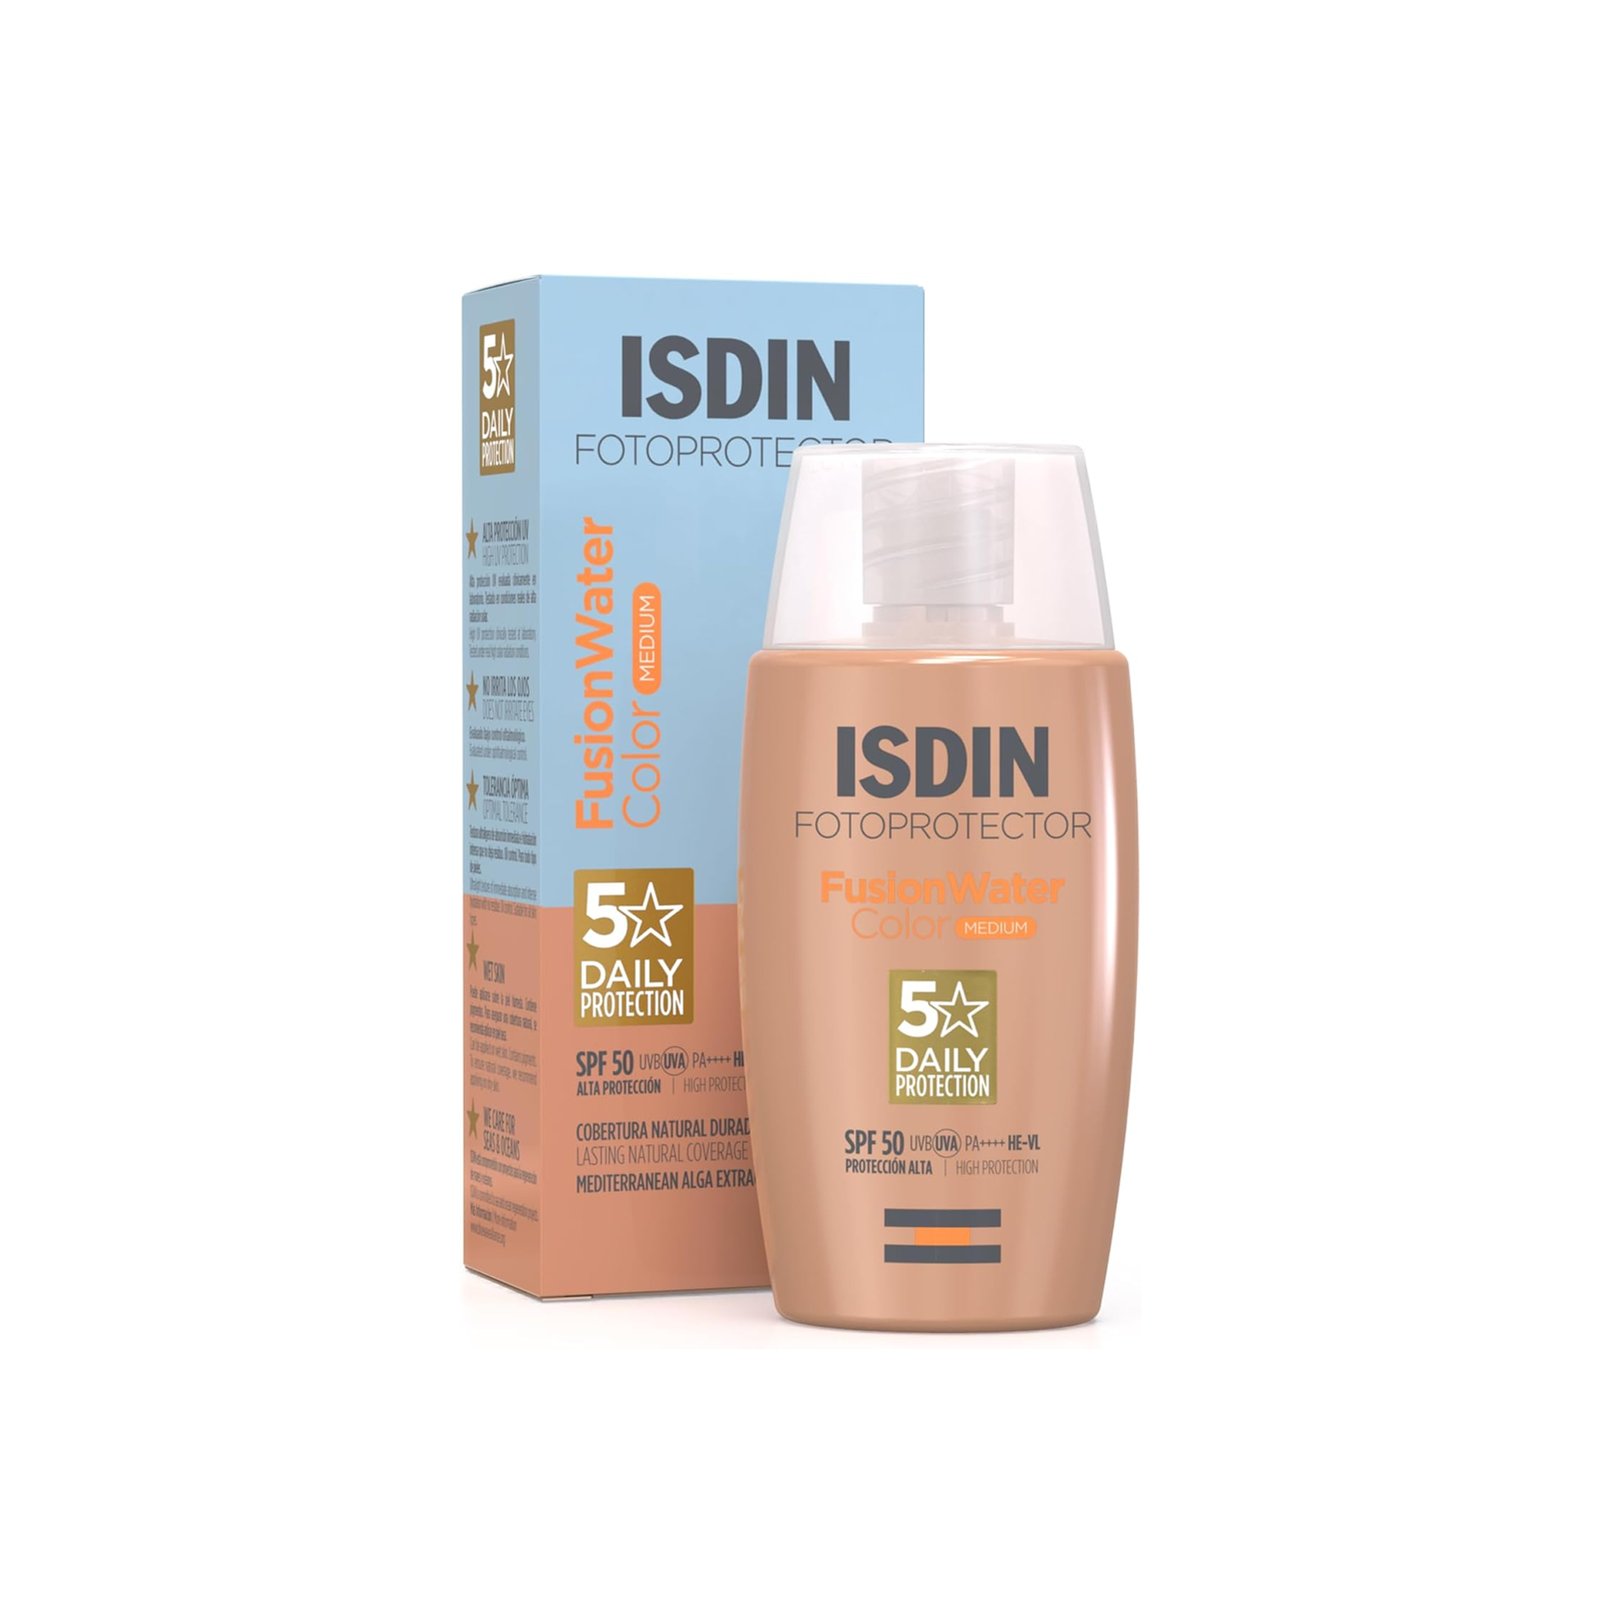 ISDIN Fotoprotector Fusion Water Color SPF50+ 50ml